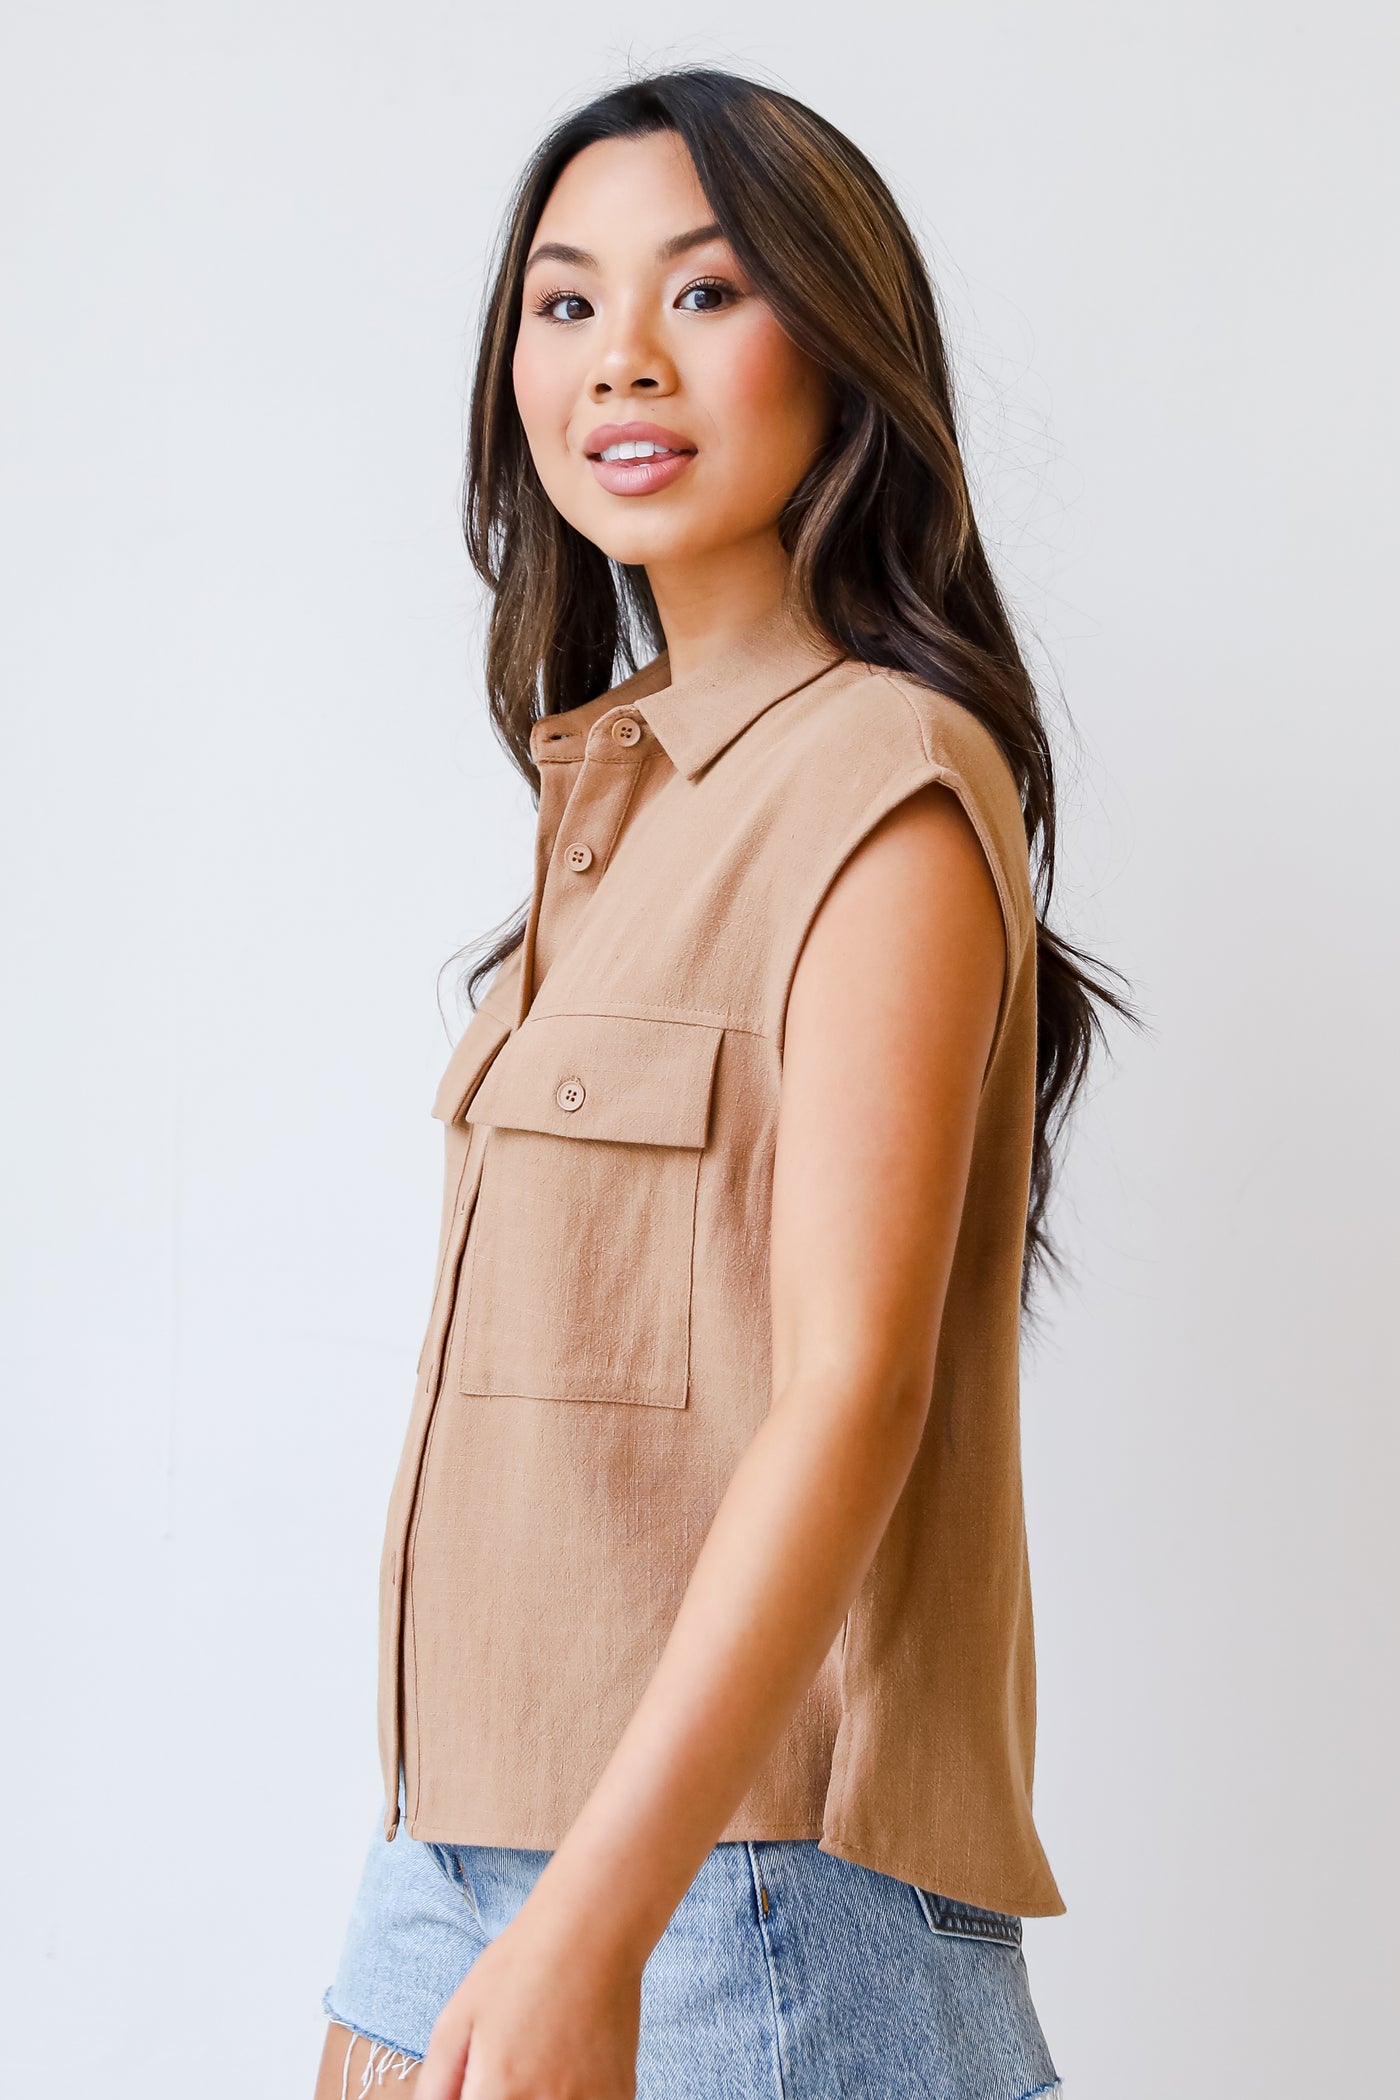 Collared Button-Up Tank side view